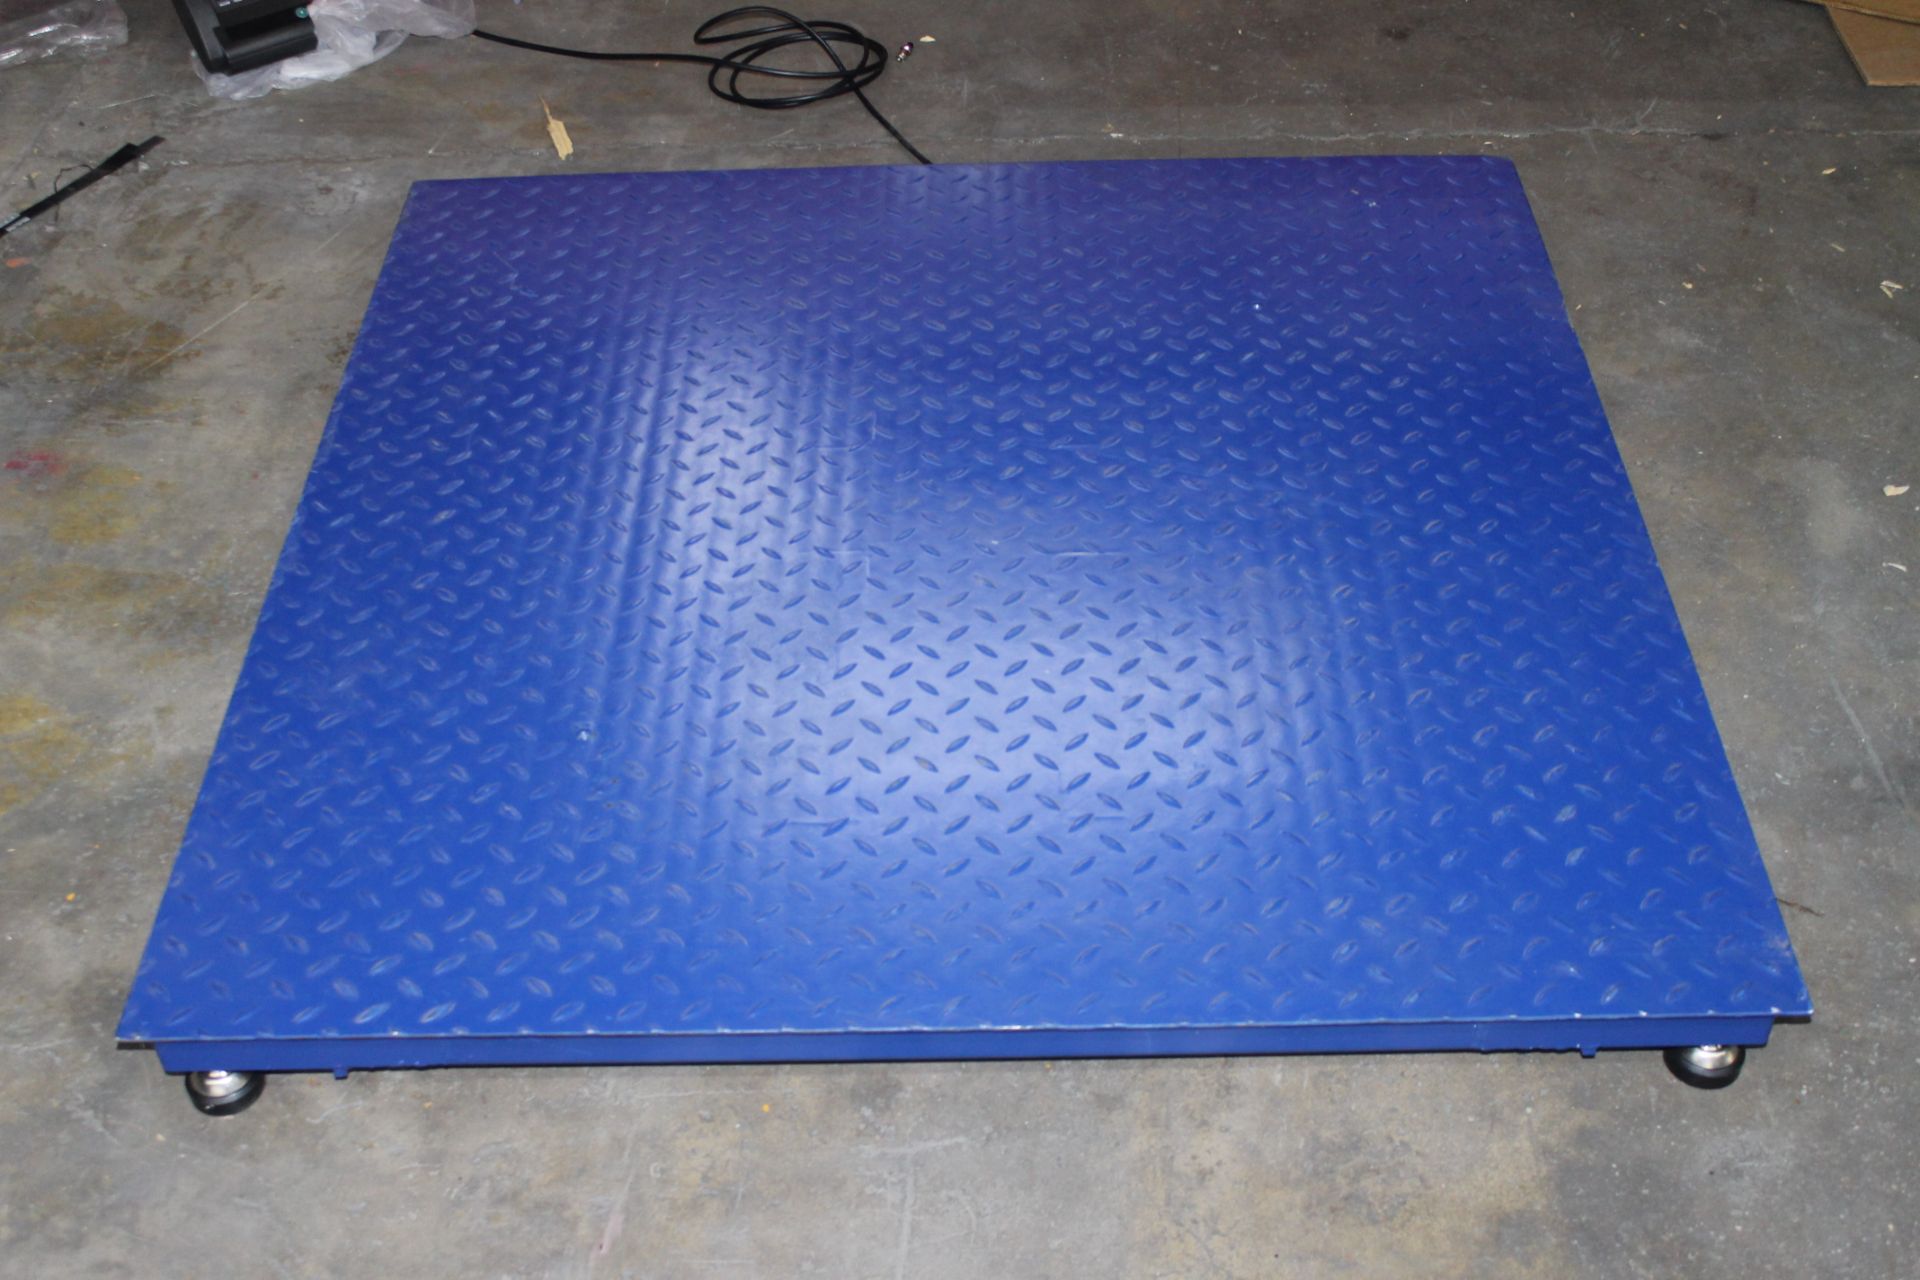 5000 LB CAP PALLET FLOOR SCALE WITH BATTERY POWERED DISPLAY